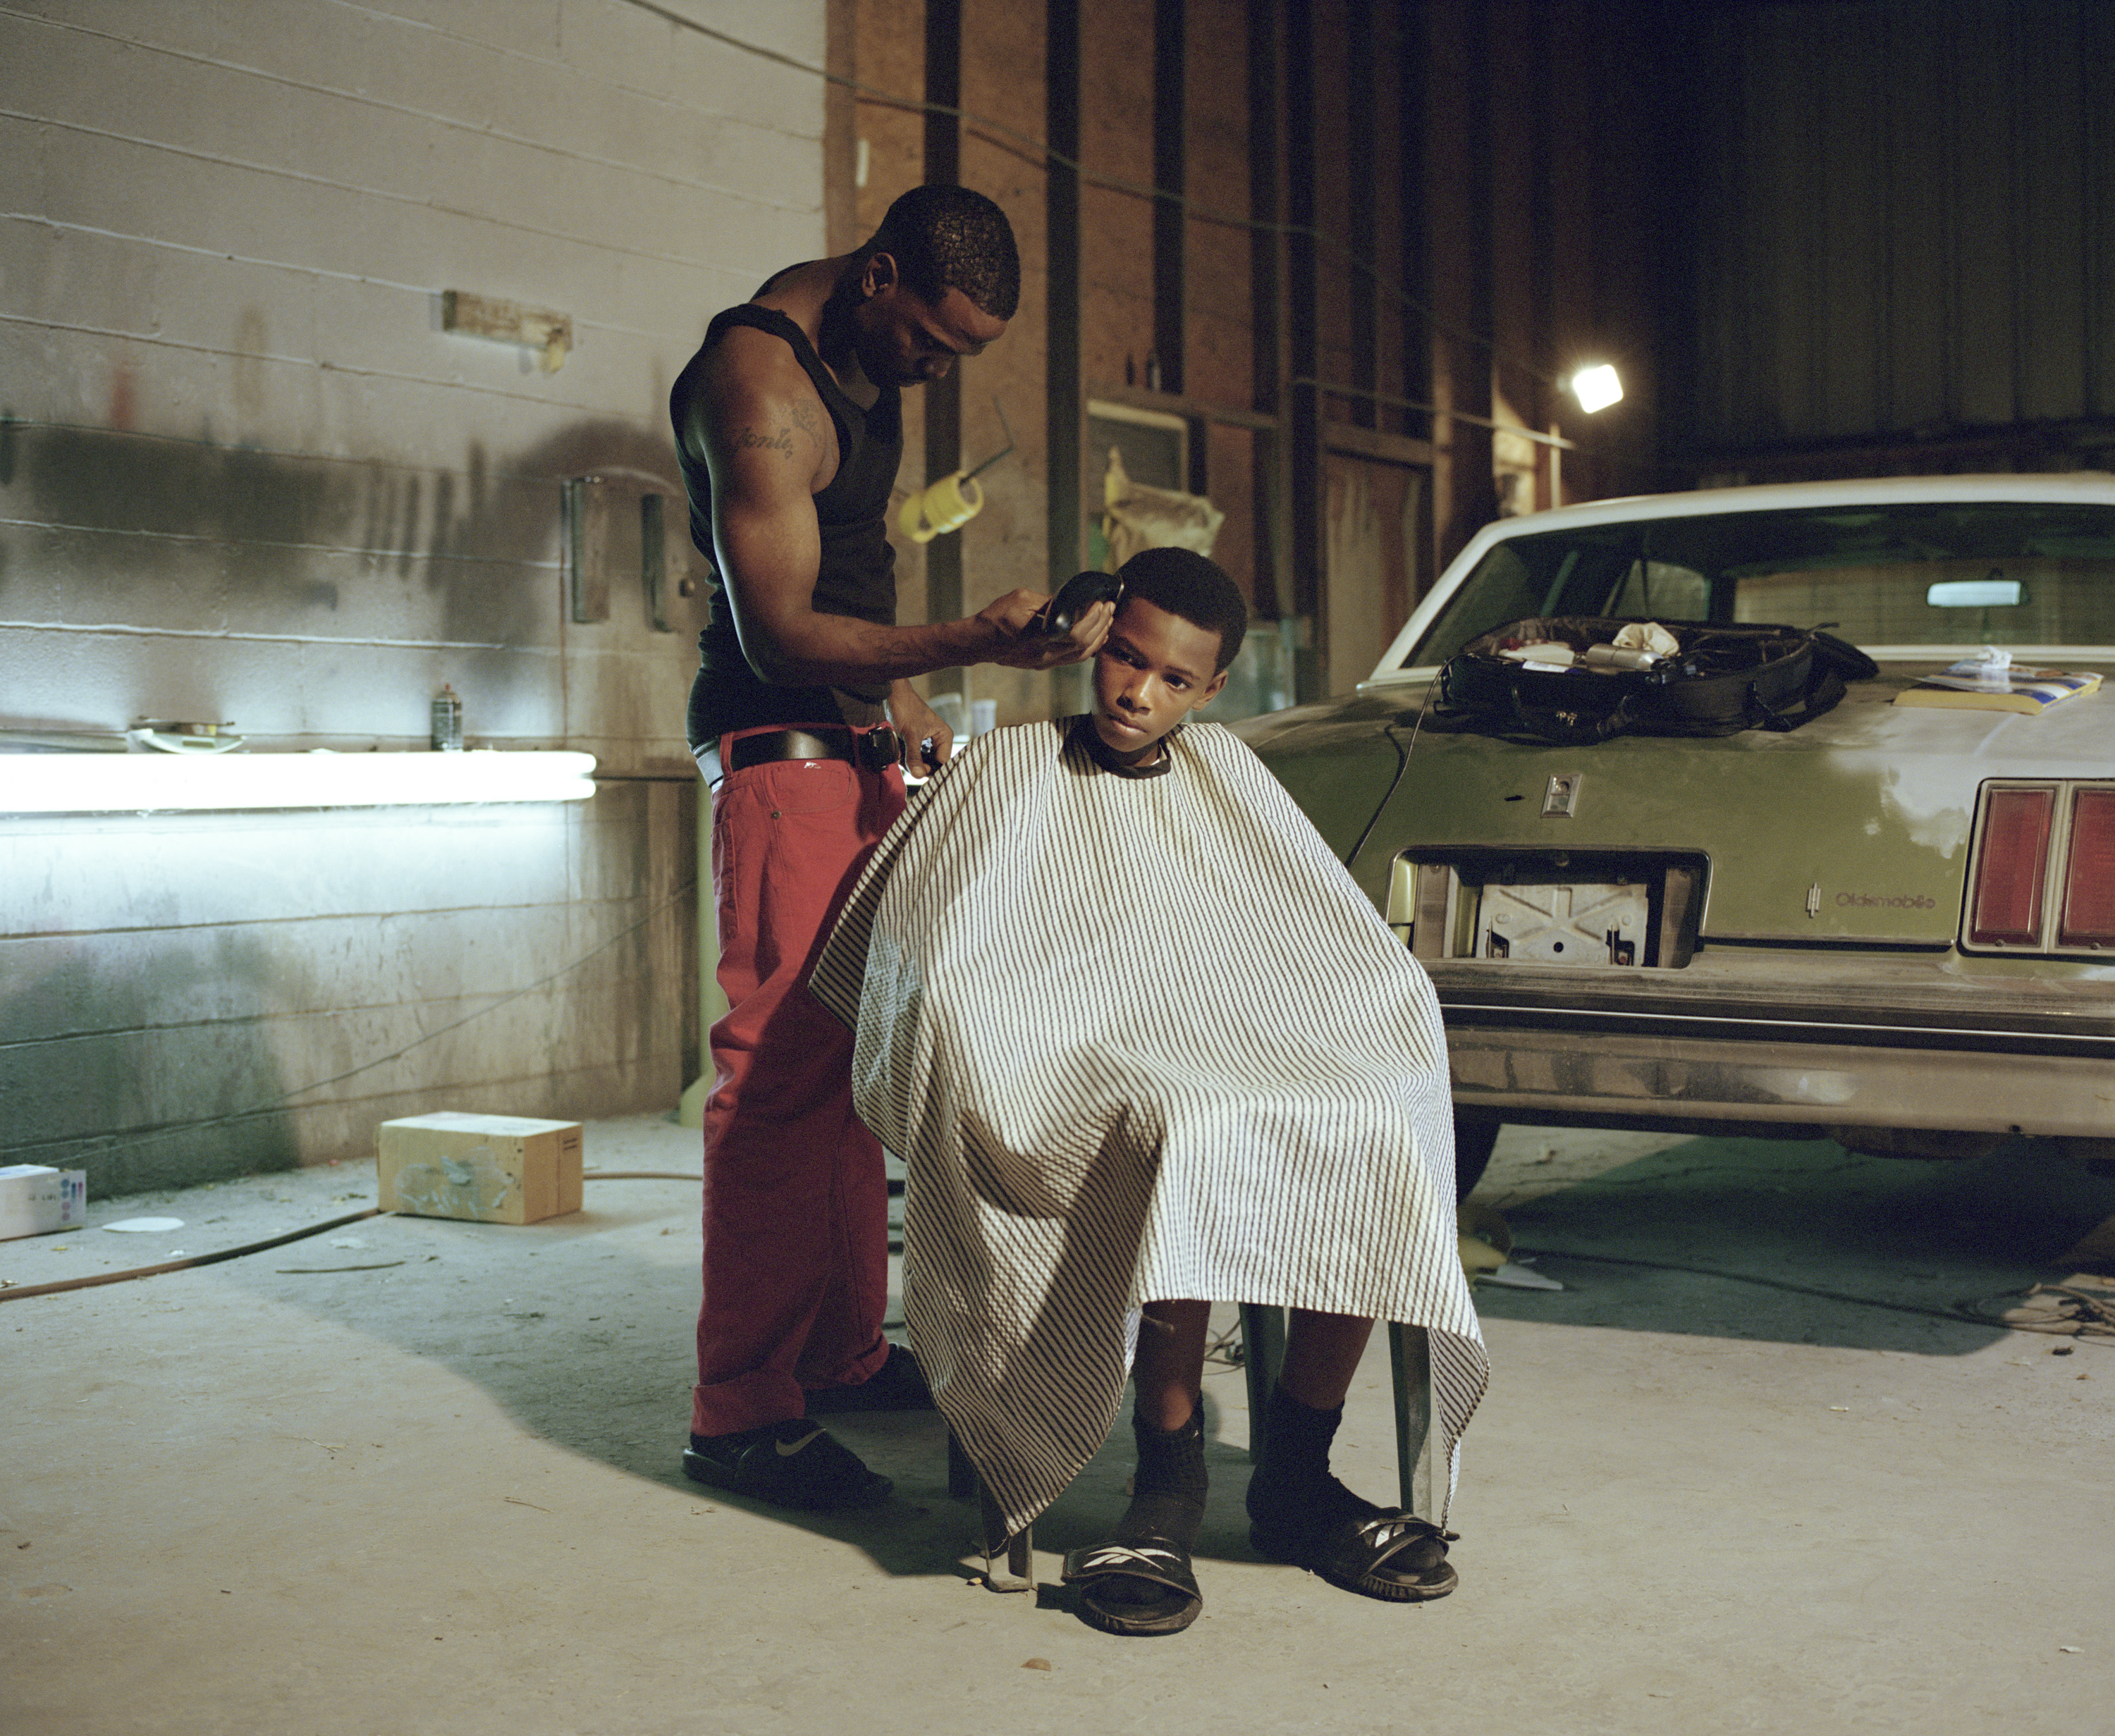 Blessing Montana is giving a haircut to his brother Satino Montana in the garage where they work. Baton Rouge, LA